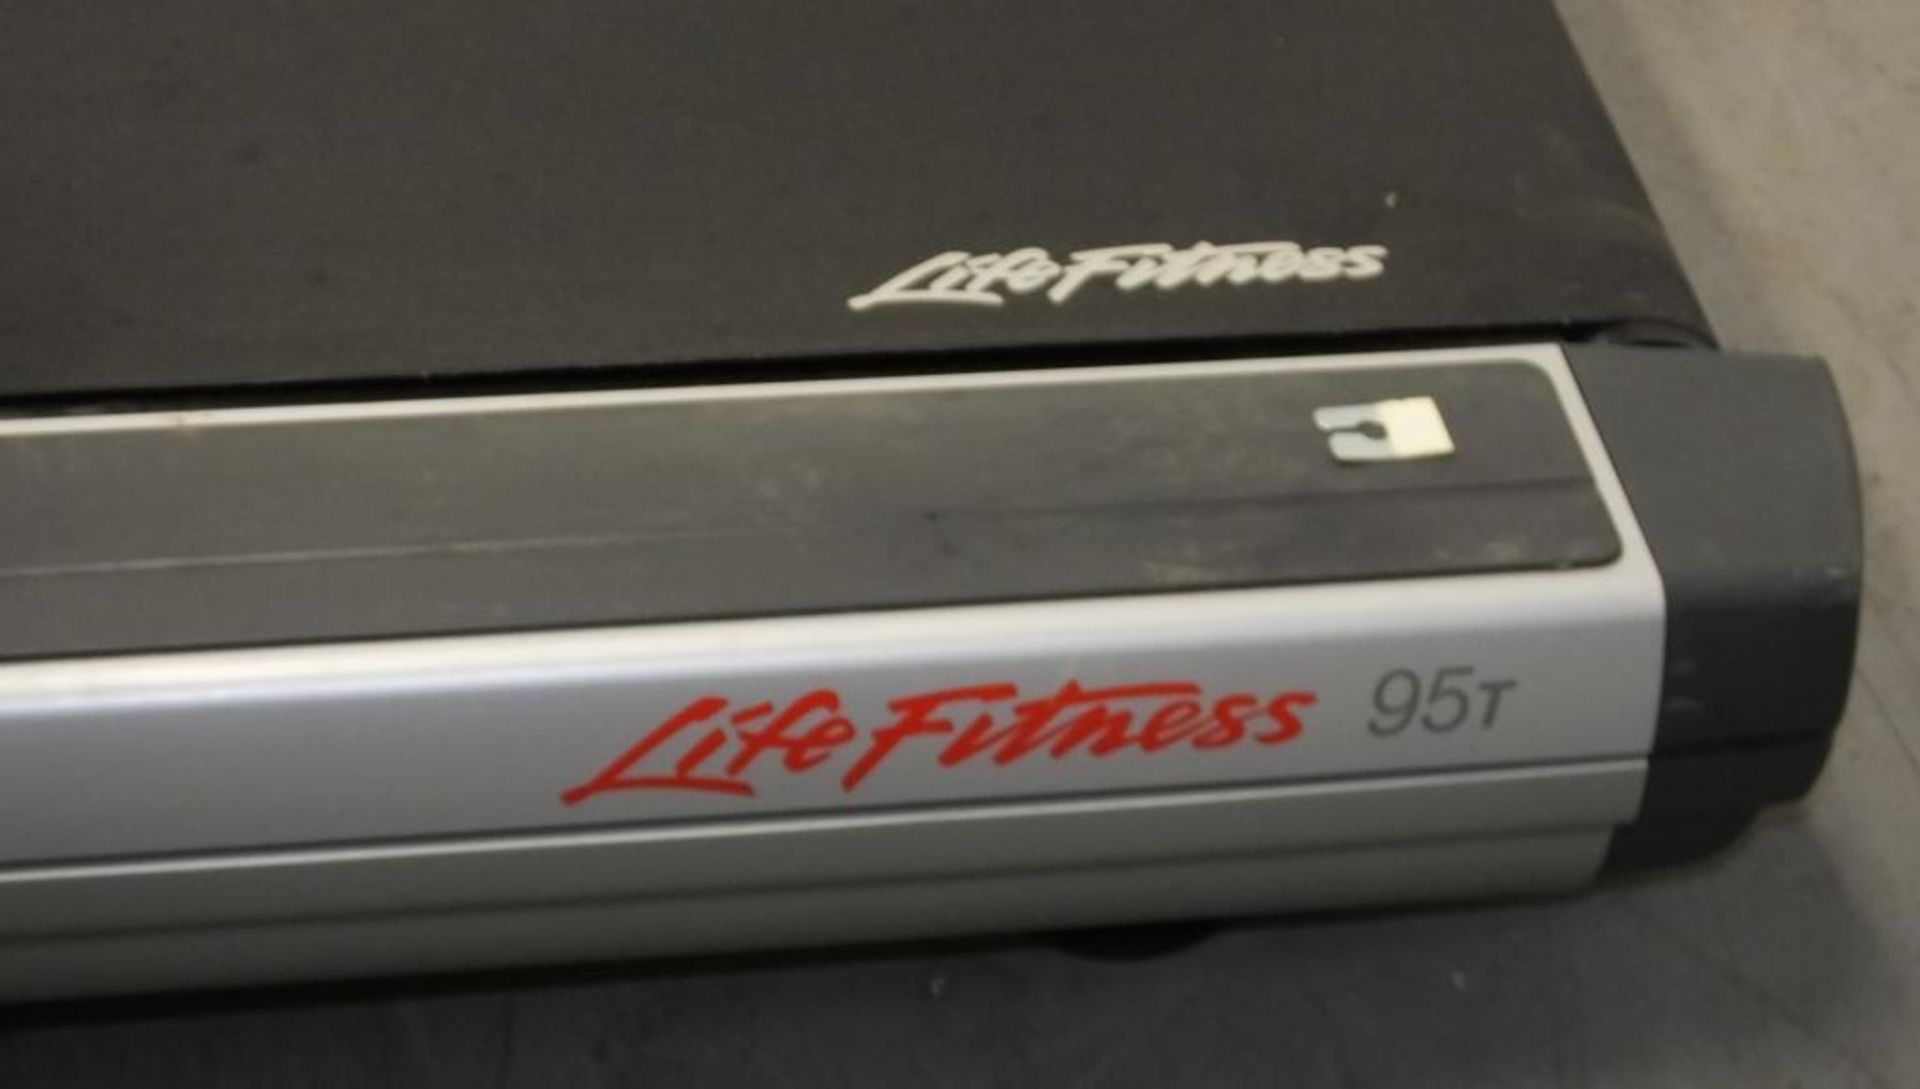 Life Fitness 95T FlexDeck shock absorption system treadmill - powers up - functionality untested - Image 3 of 15